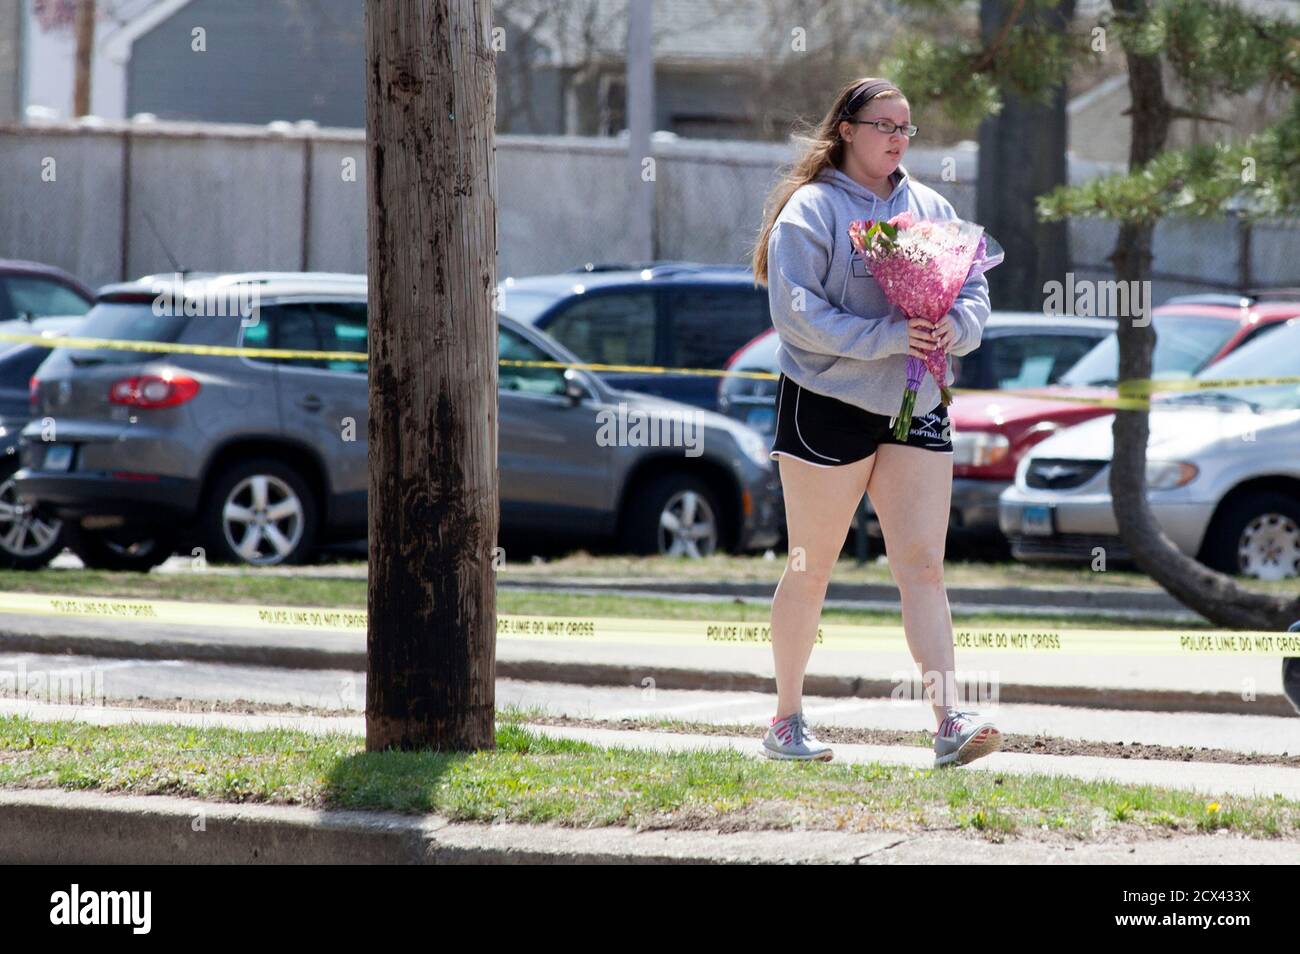 A girl walks with flowers in front of Jonathan Law High School in Milford, Connecticut April 25, 2014. A 16-year-old girl was killed on Friday in an attack inside a Connecticut high school and authorities were investigating reports she was stabbed by a fellow student after rejecting his invitation to the prom, police said. The victim, Maren Sanchez, a junior at Jonathan Law High School in Milford, was pronounced dead at the hospital shortly after the 7 a.m. (1100 GMT) attack, Milford Police Chief Keith Mello told a news conference. REUTERS/Michelle McLoughlin (UNITED STATES - Tags: EDUCATION C Stock Photo